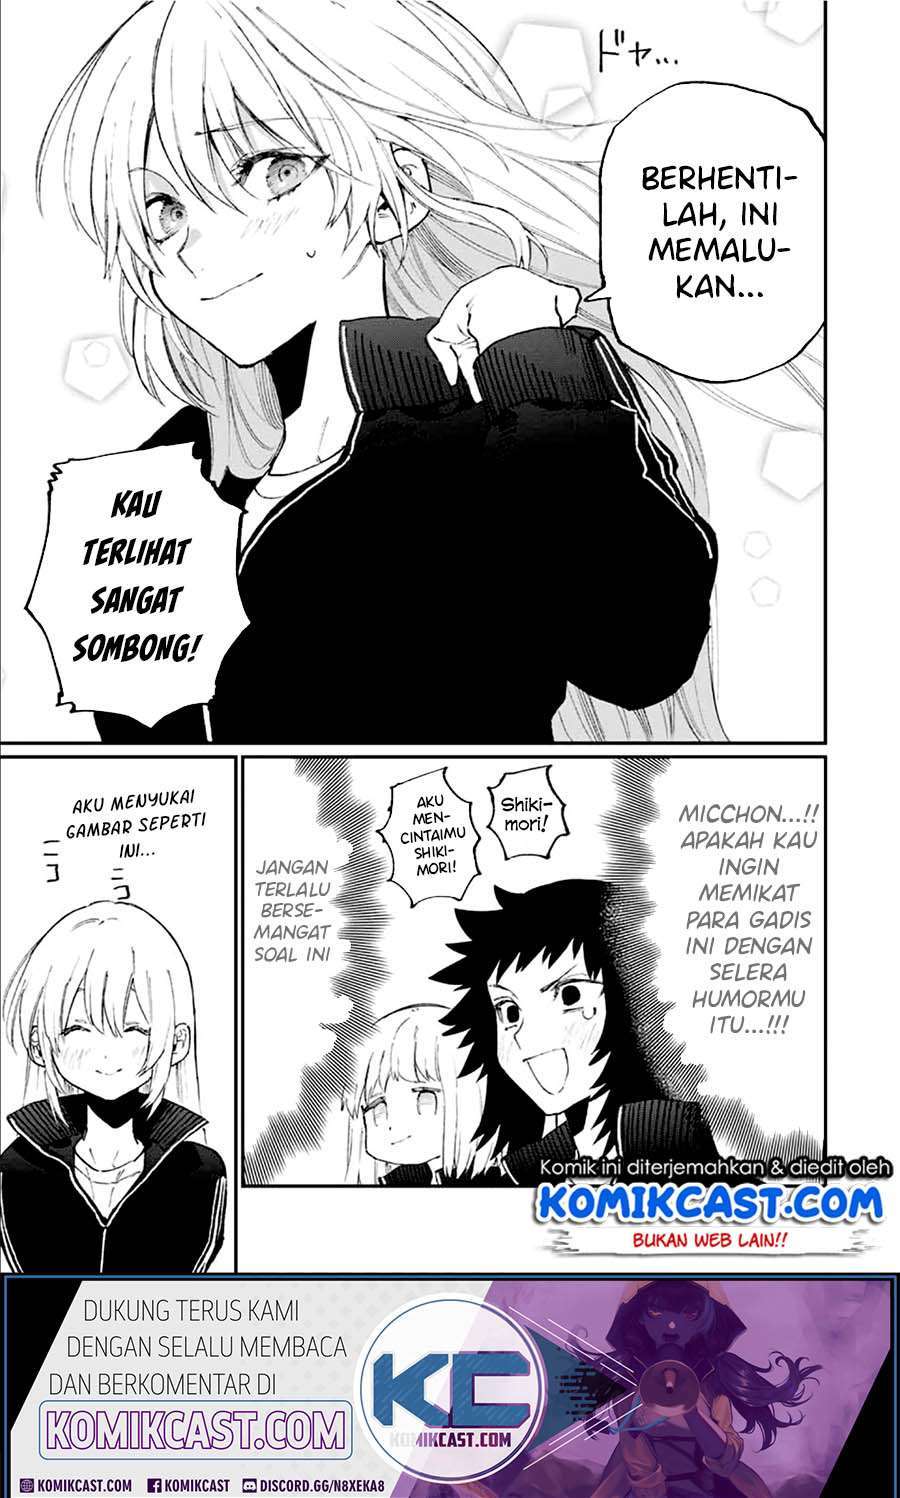 That Girl Is Not Just Cute Chapter 92 Bahasa Indonesia